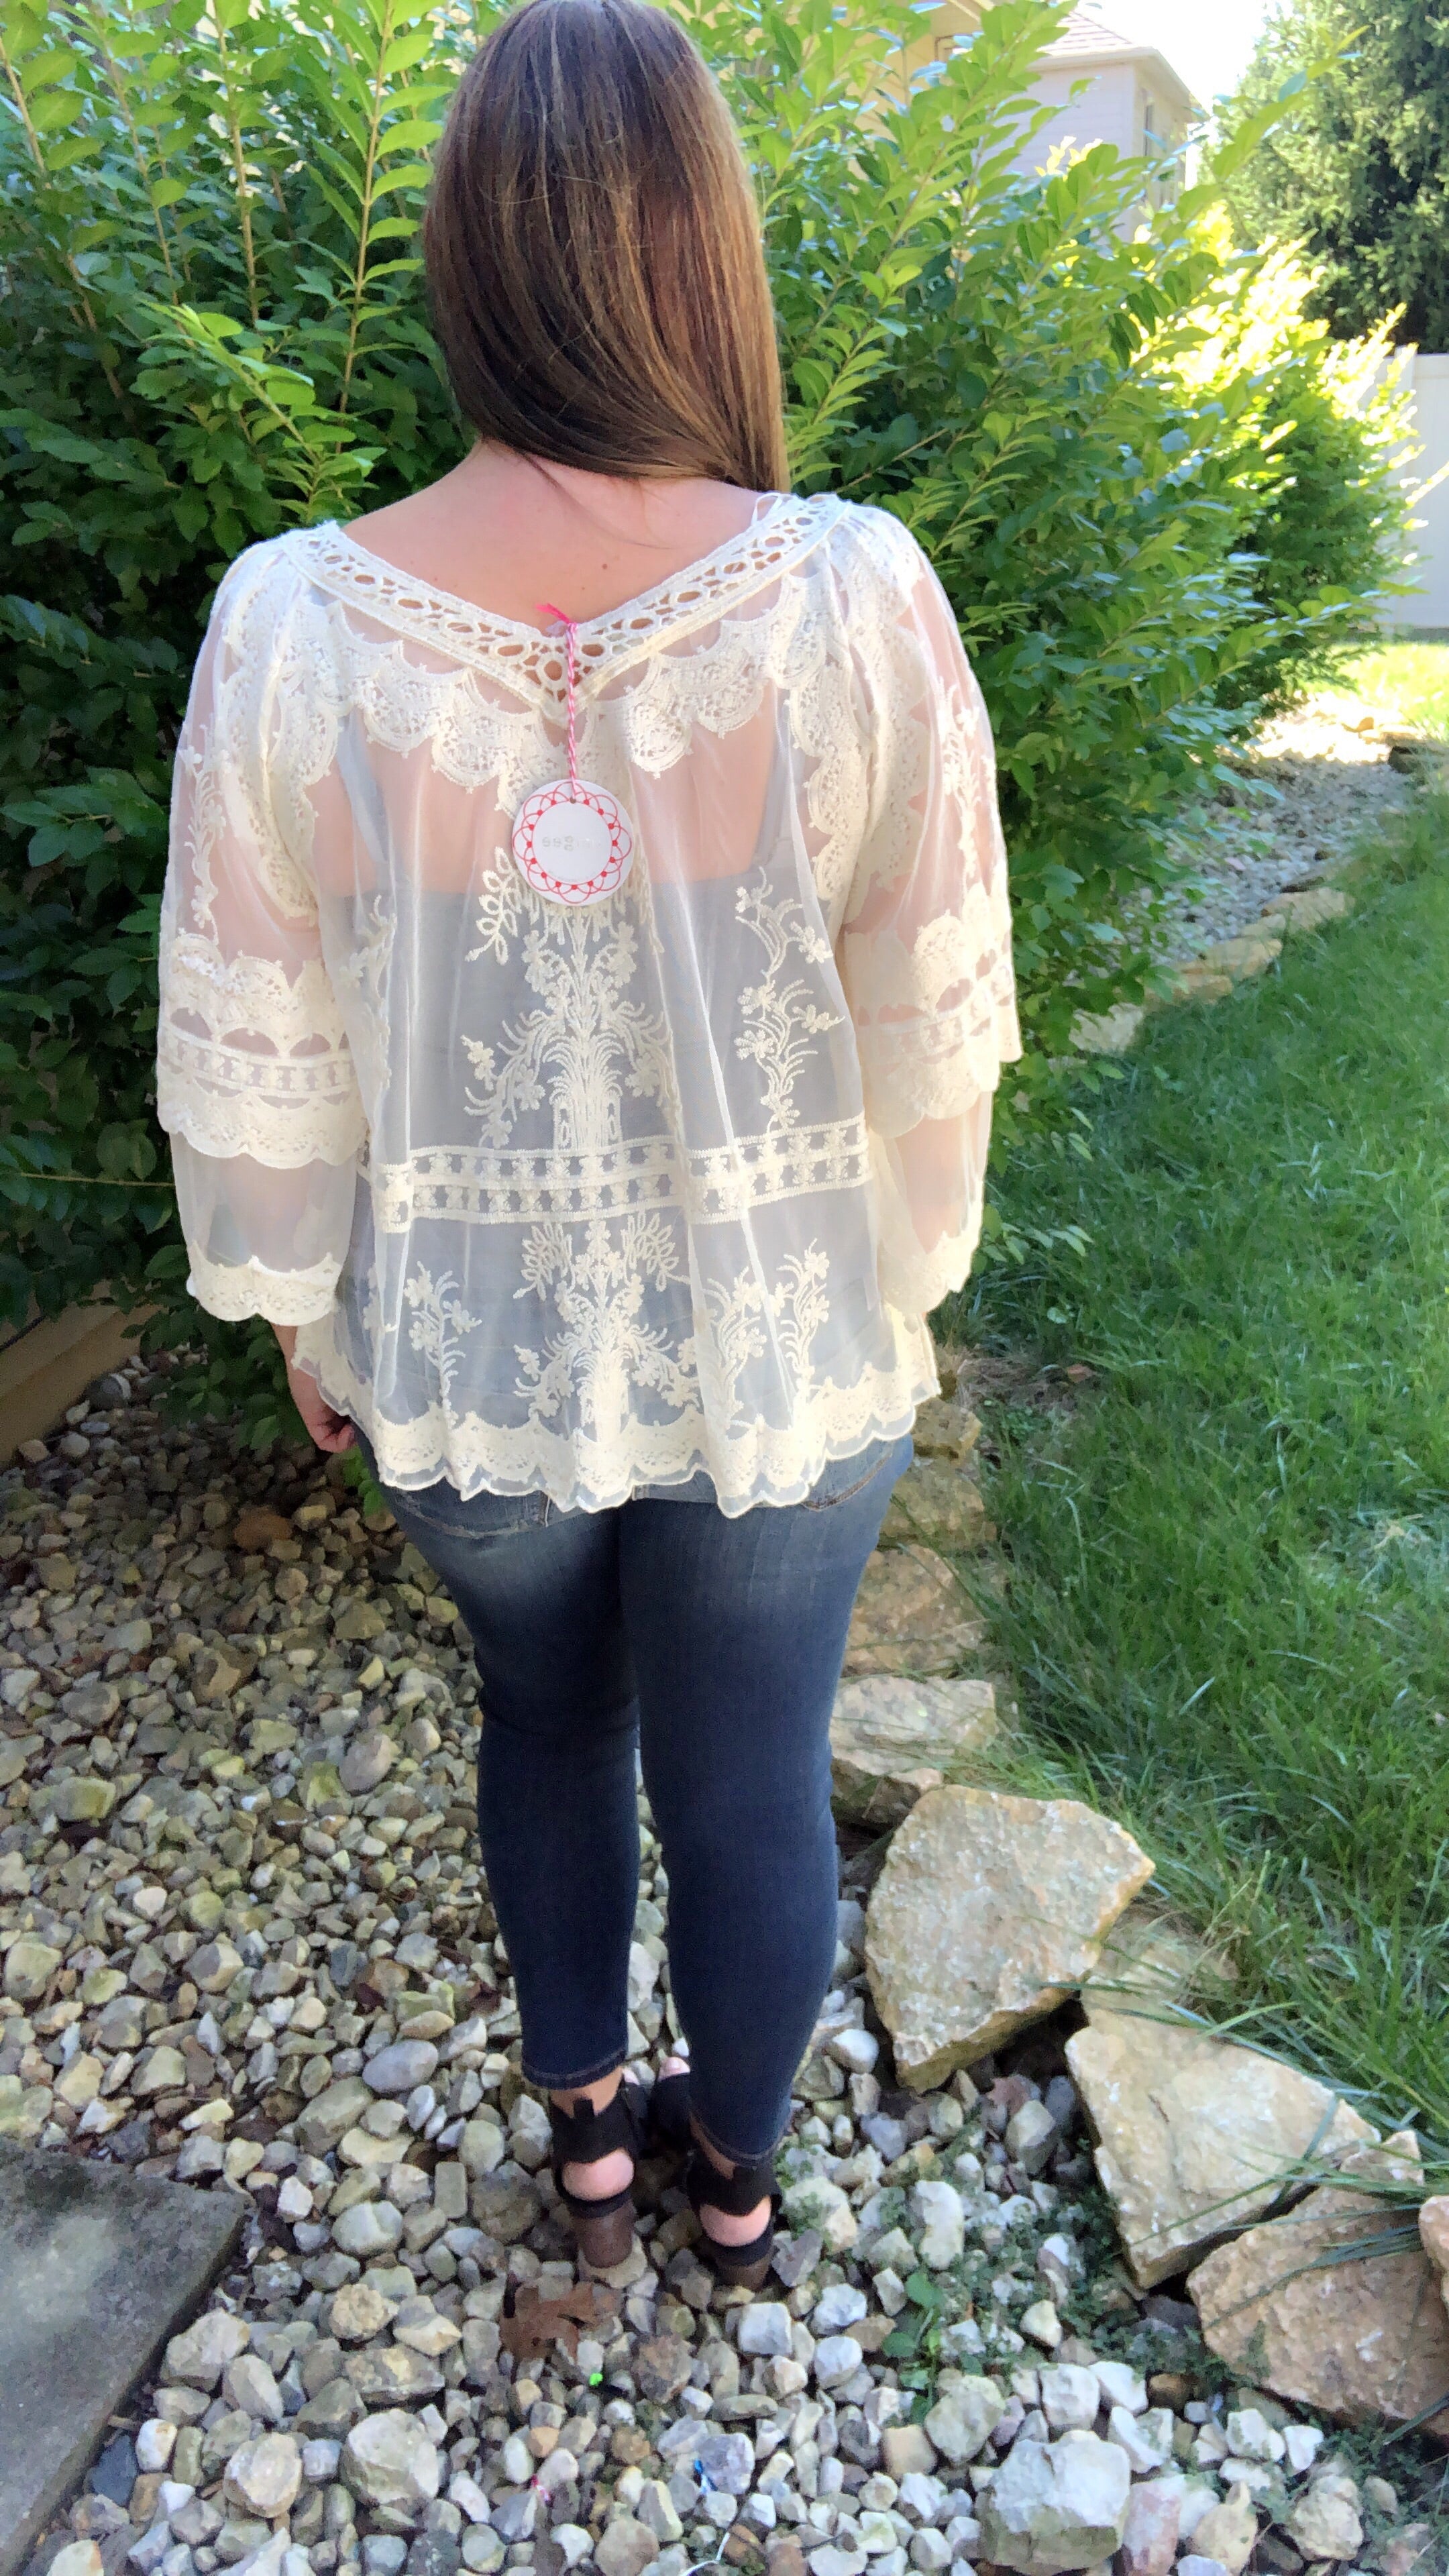 Lace sheer top